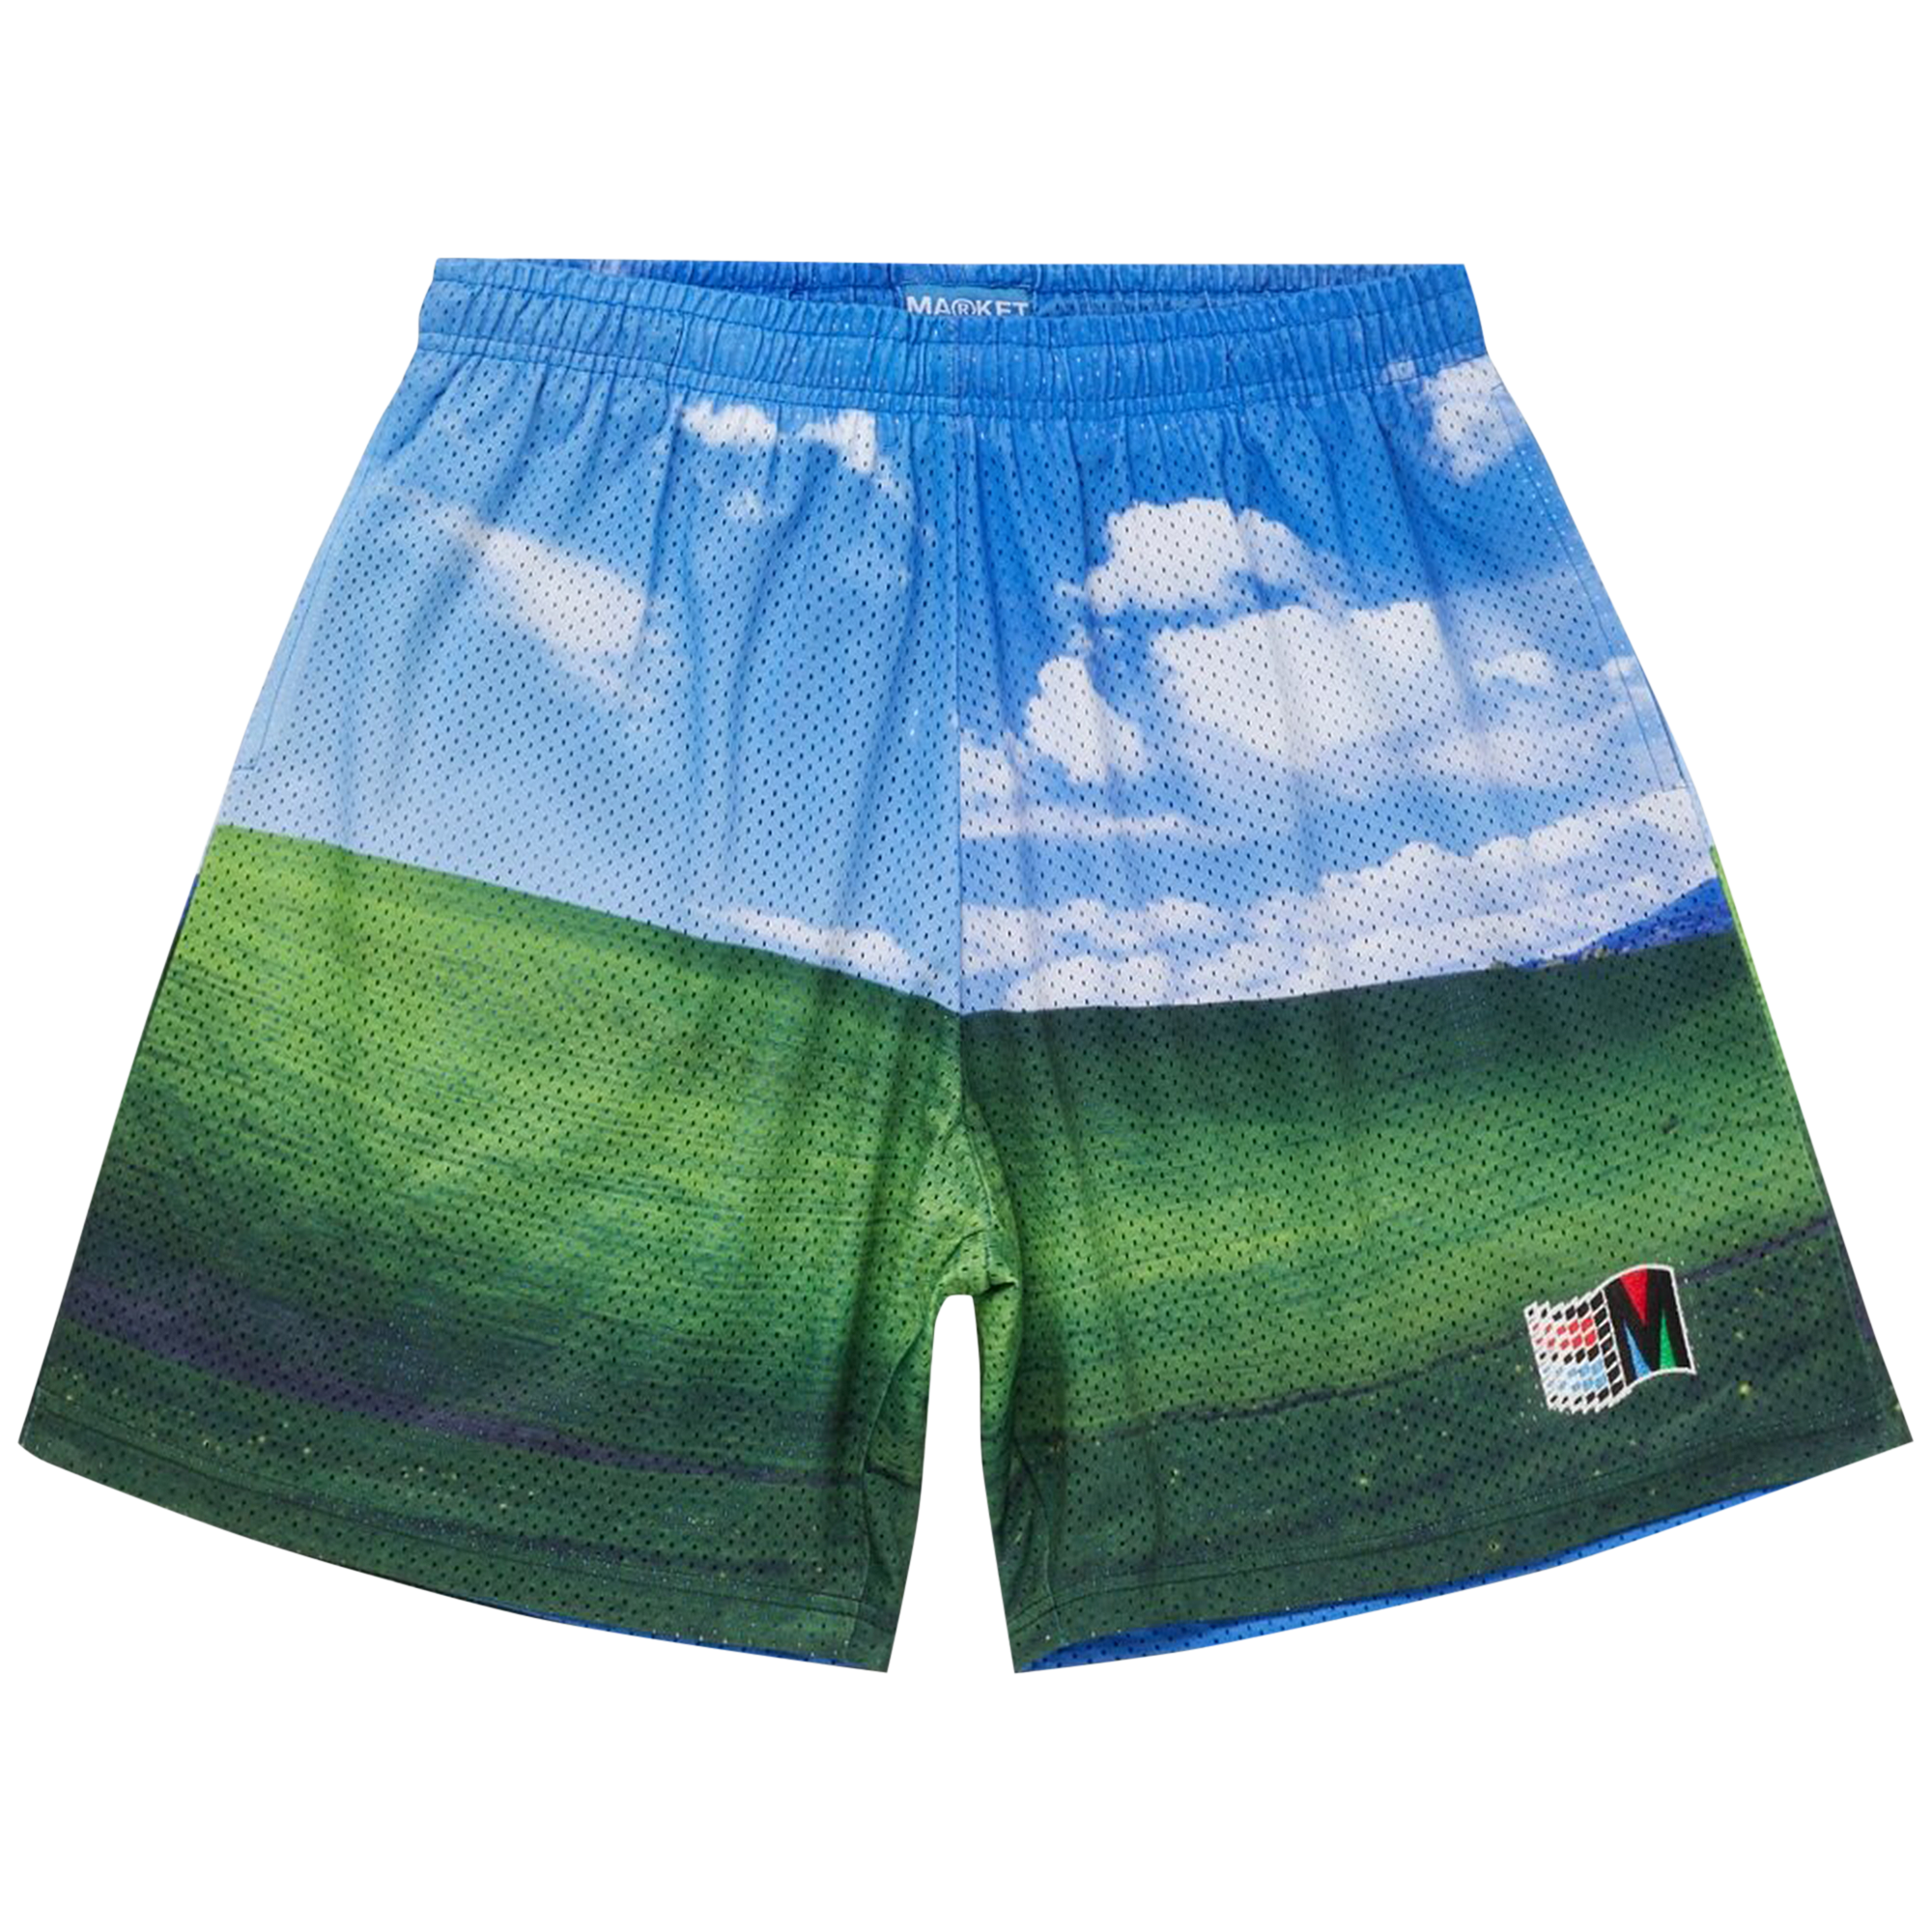 Pre-owned Market Bliss Mesh Shorts 'blue'